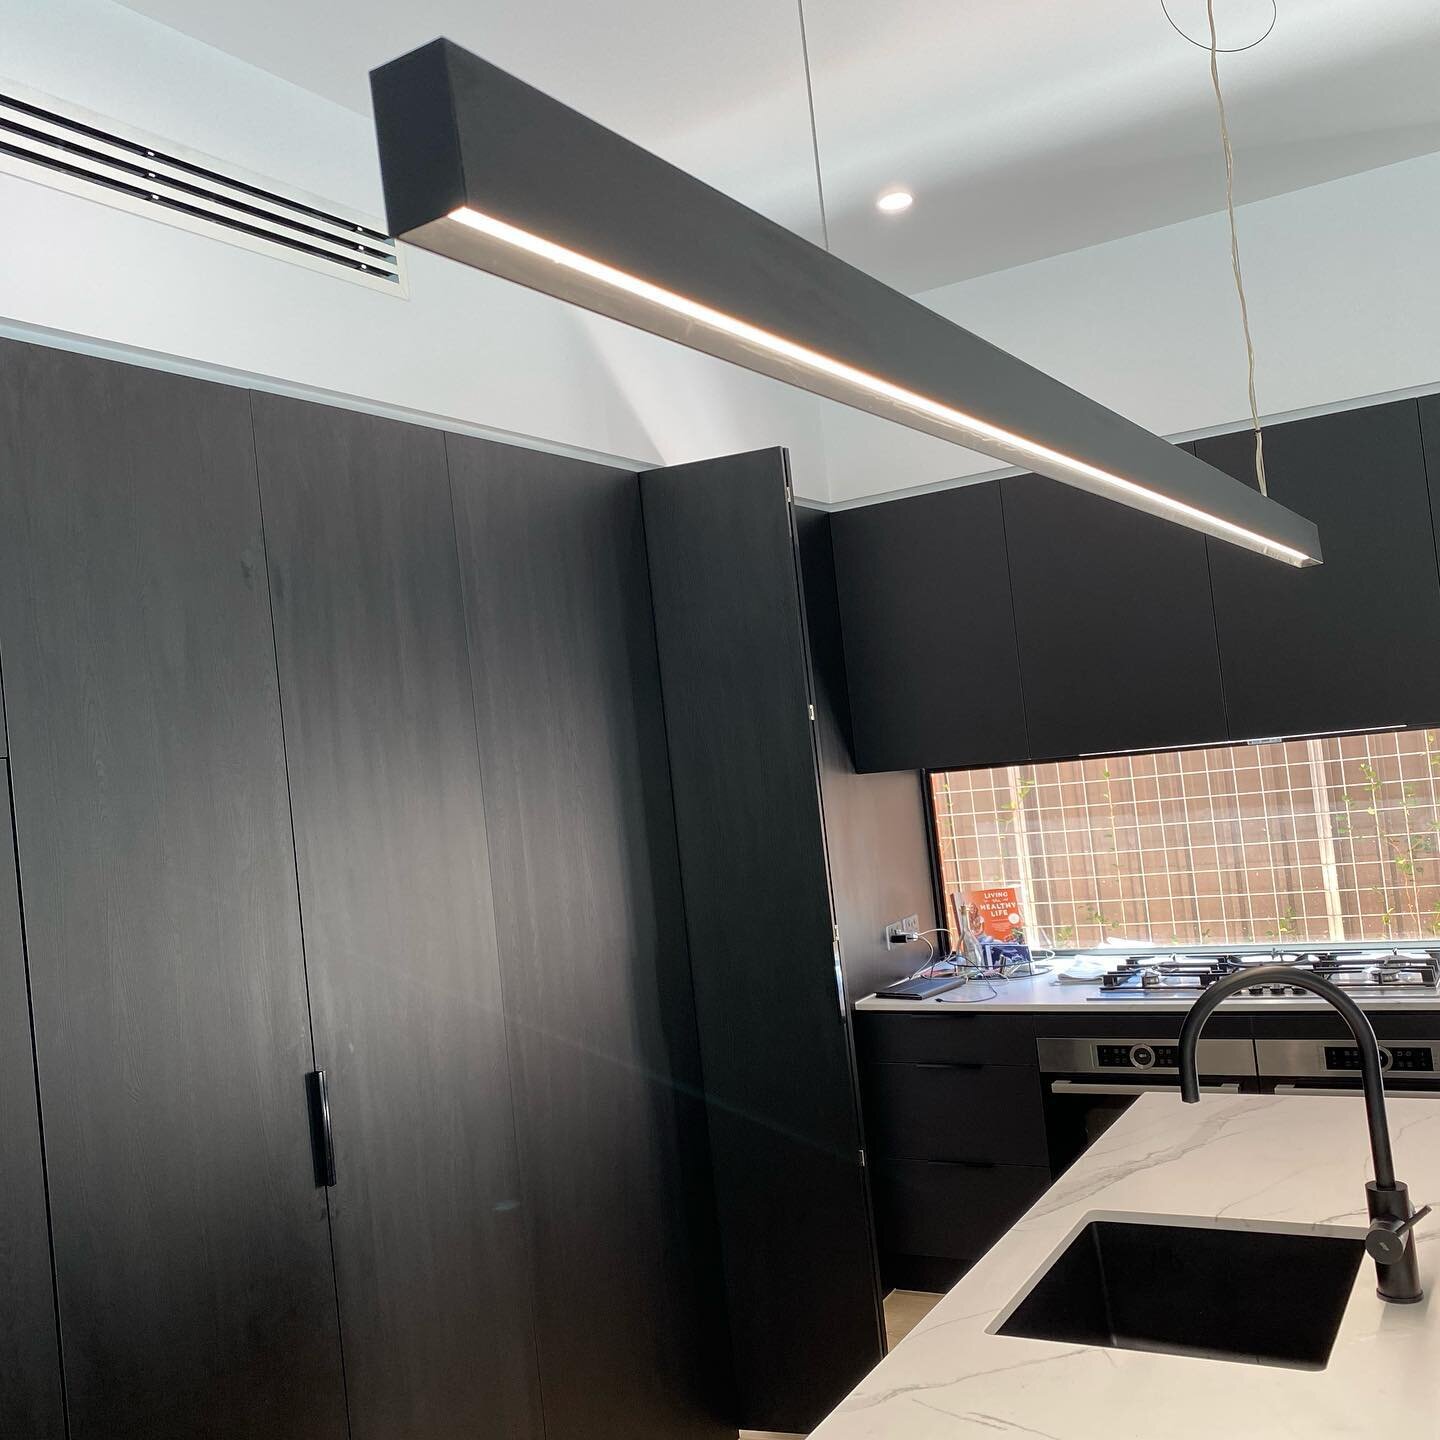 This 3m Matt black LED pendant that we installed yesterday looked epic! Perfect finish to a beaut kitchen!